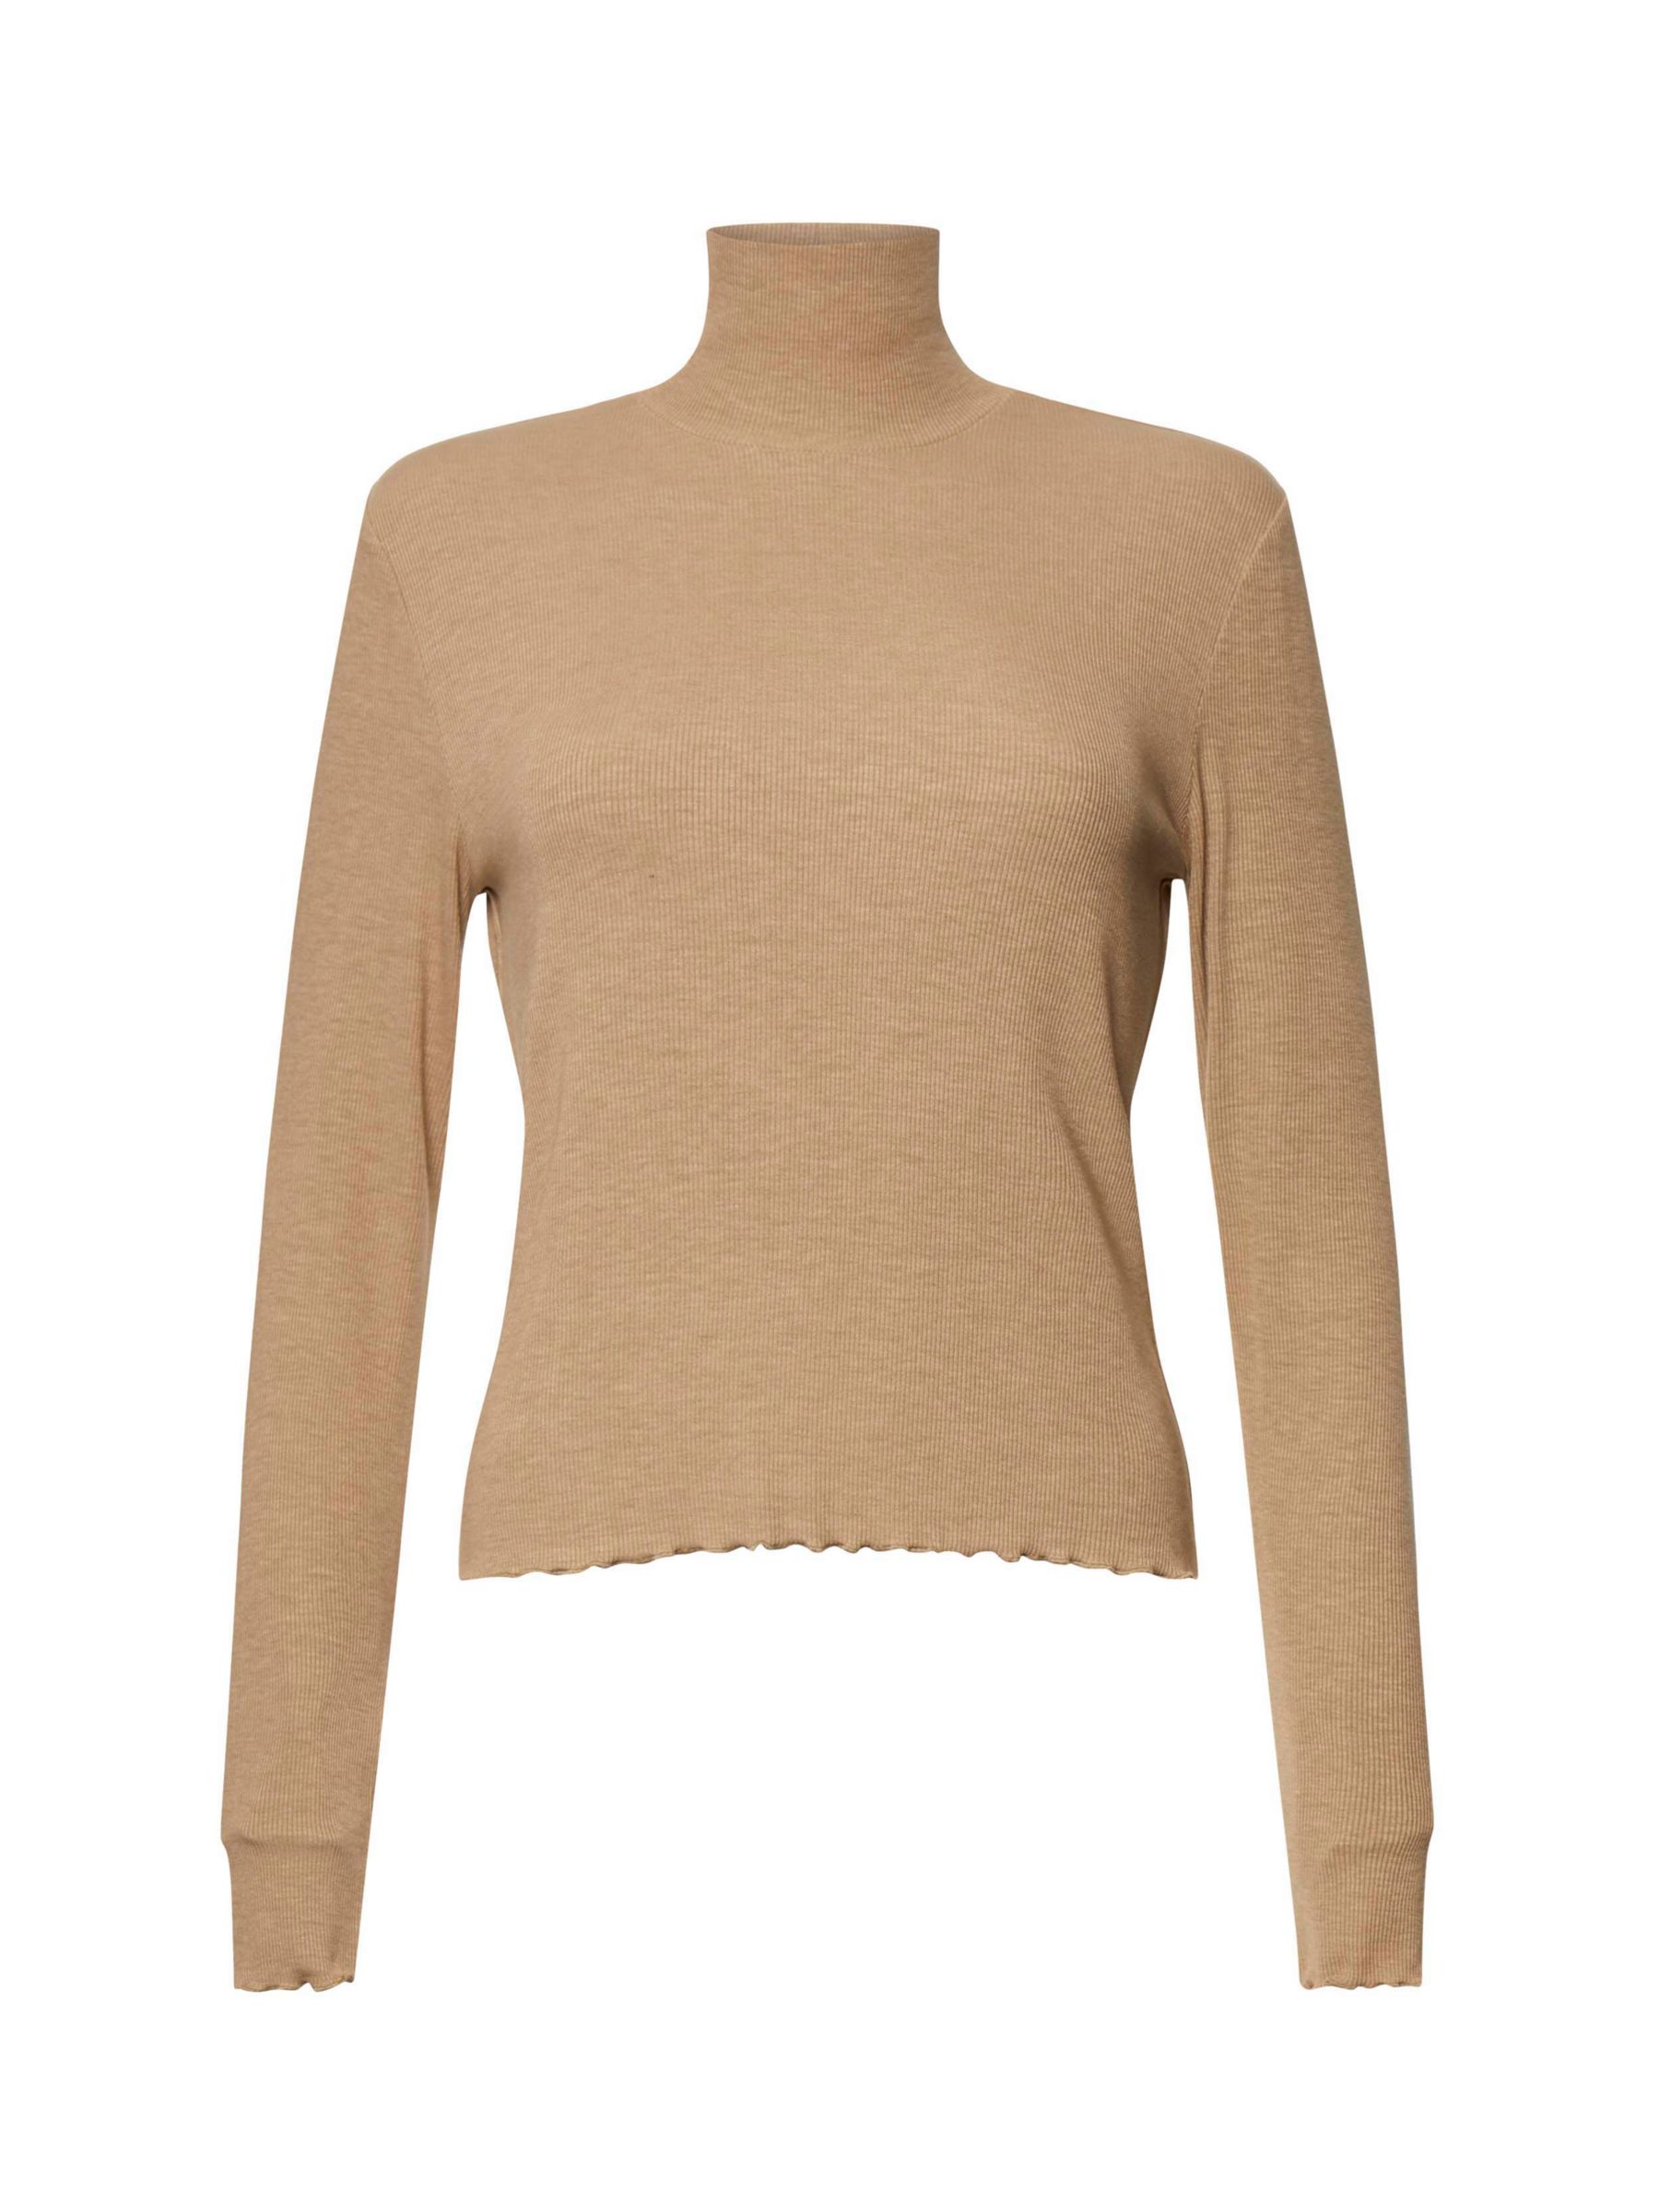 French Connection Tam Ribbed Jersey Top, Camel at John Lewis & Partners